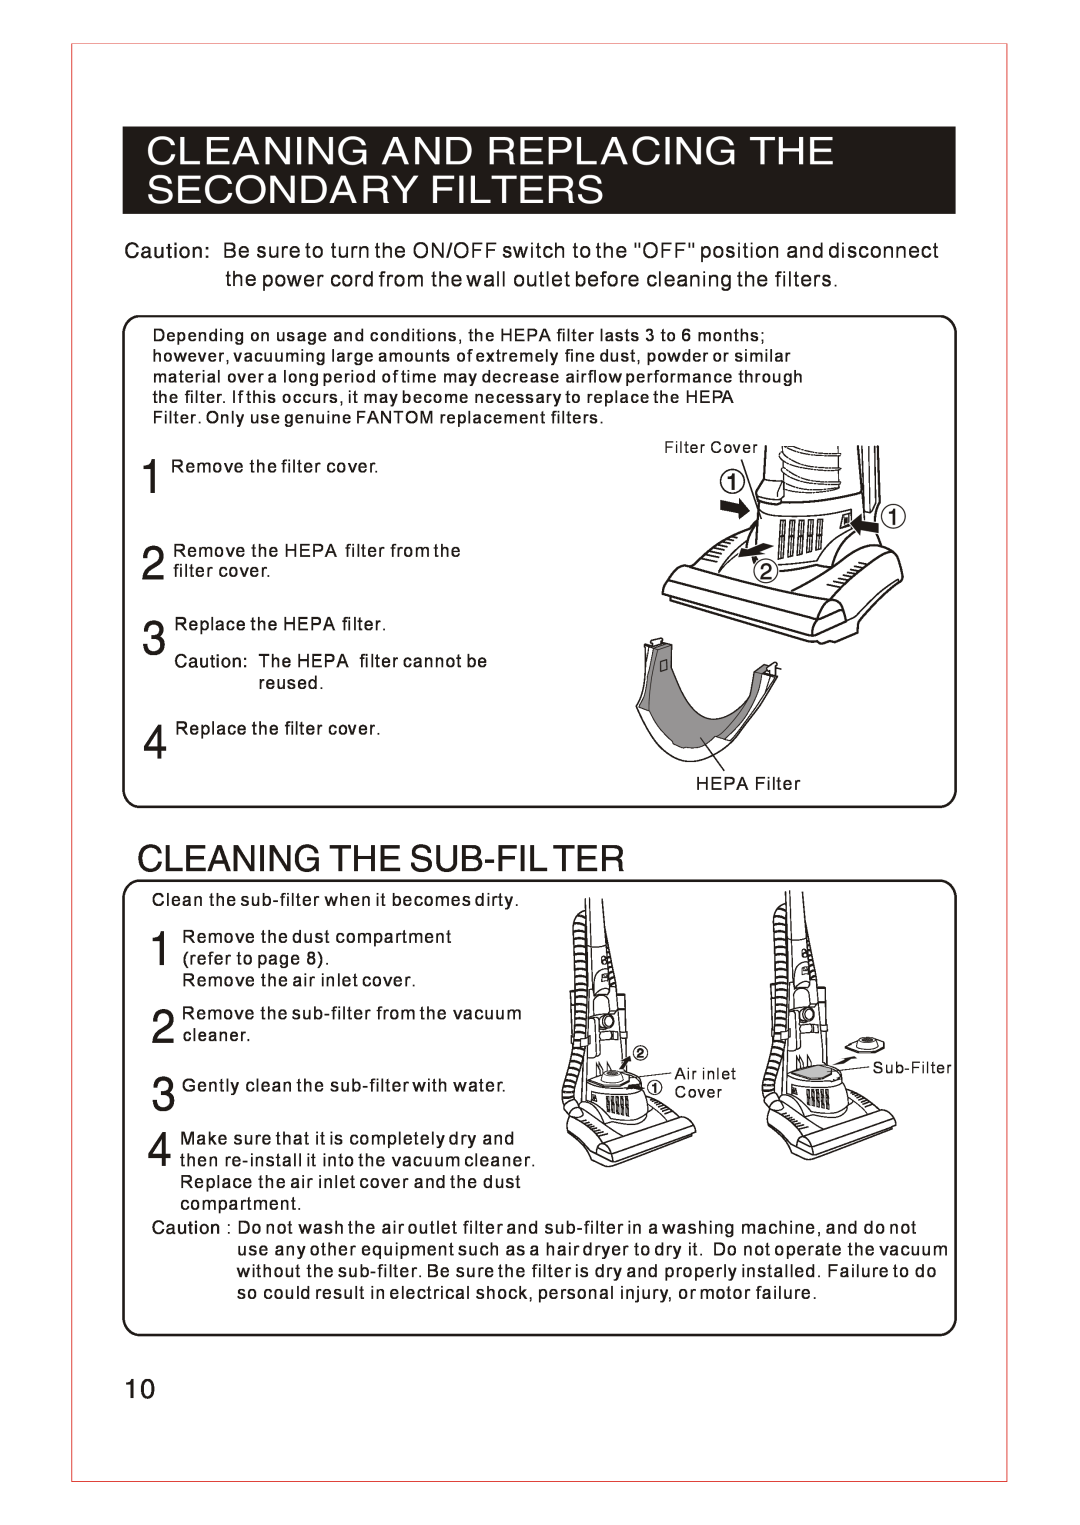 Fantom Vacuum FM740 B instruction manual Cleaning And Replacing The Secondary Filters, Cleaning The Sub-Filter 